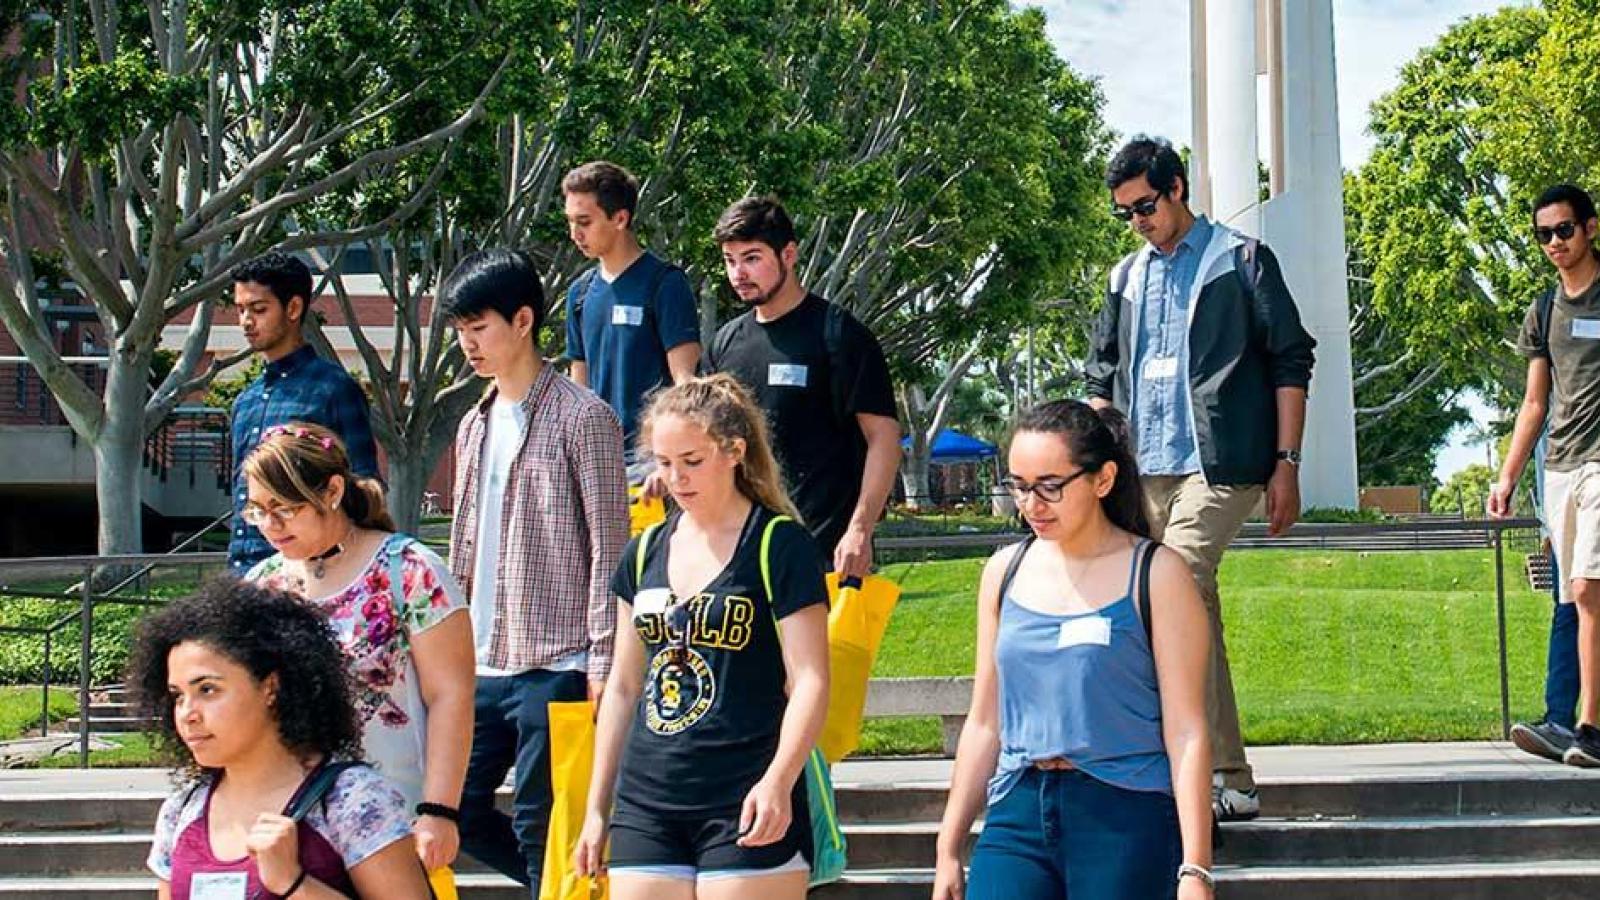 New Students Touring the CSULB Campus